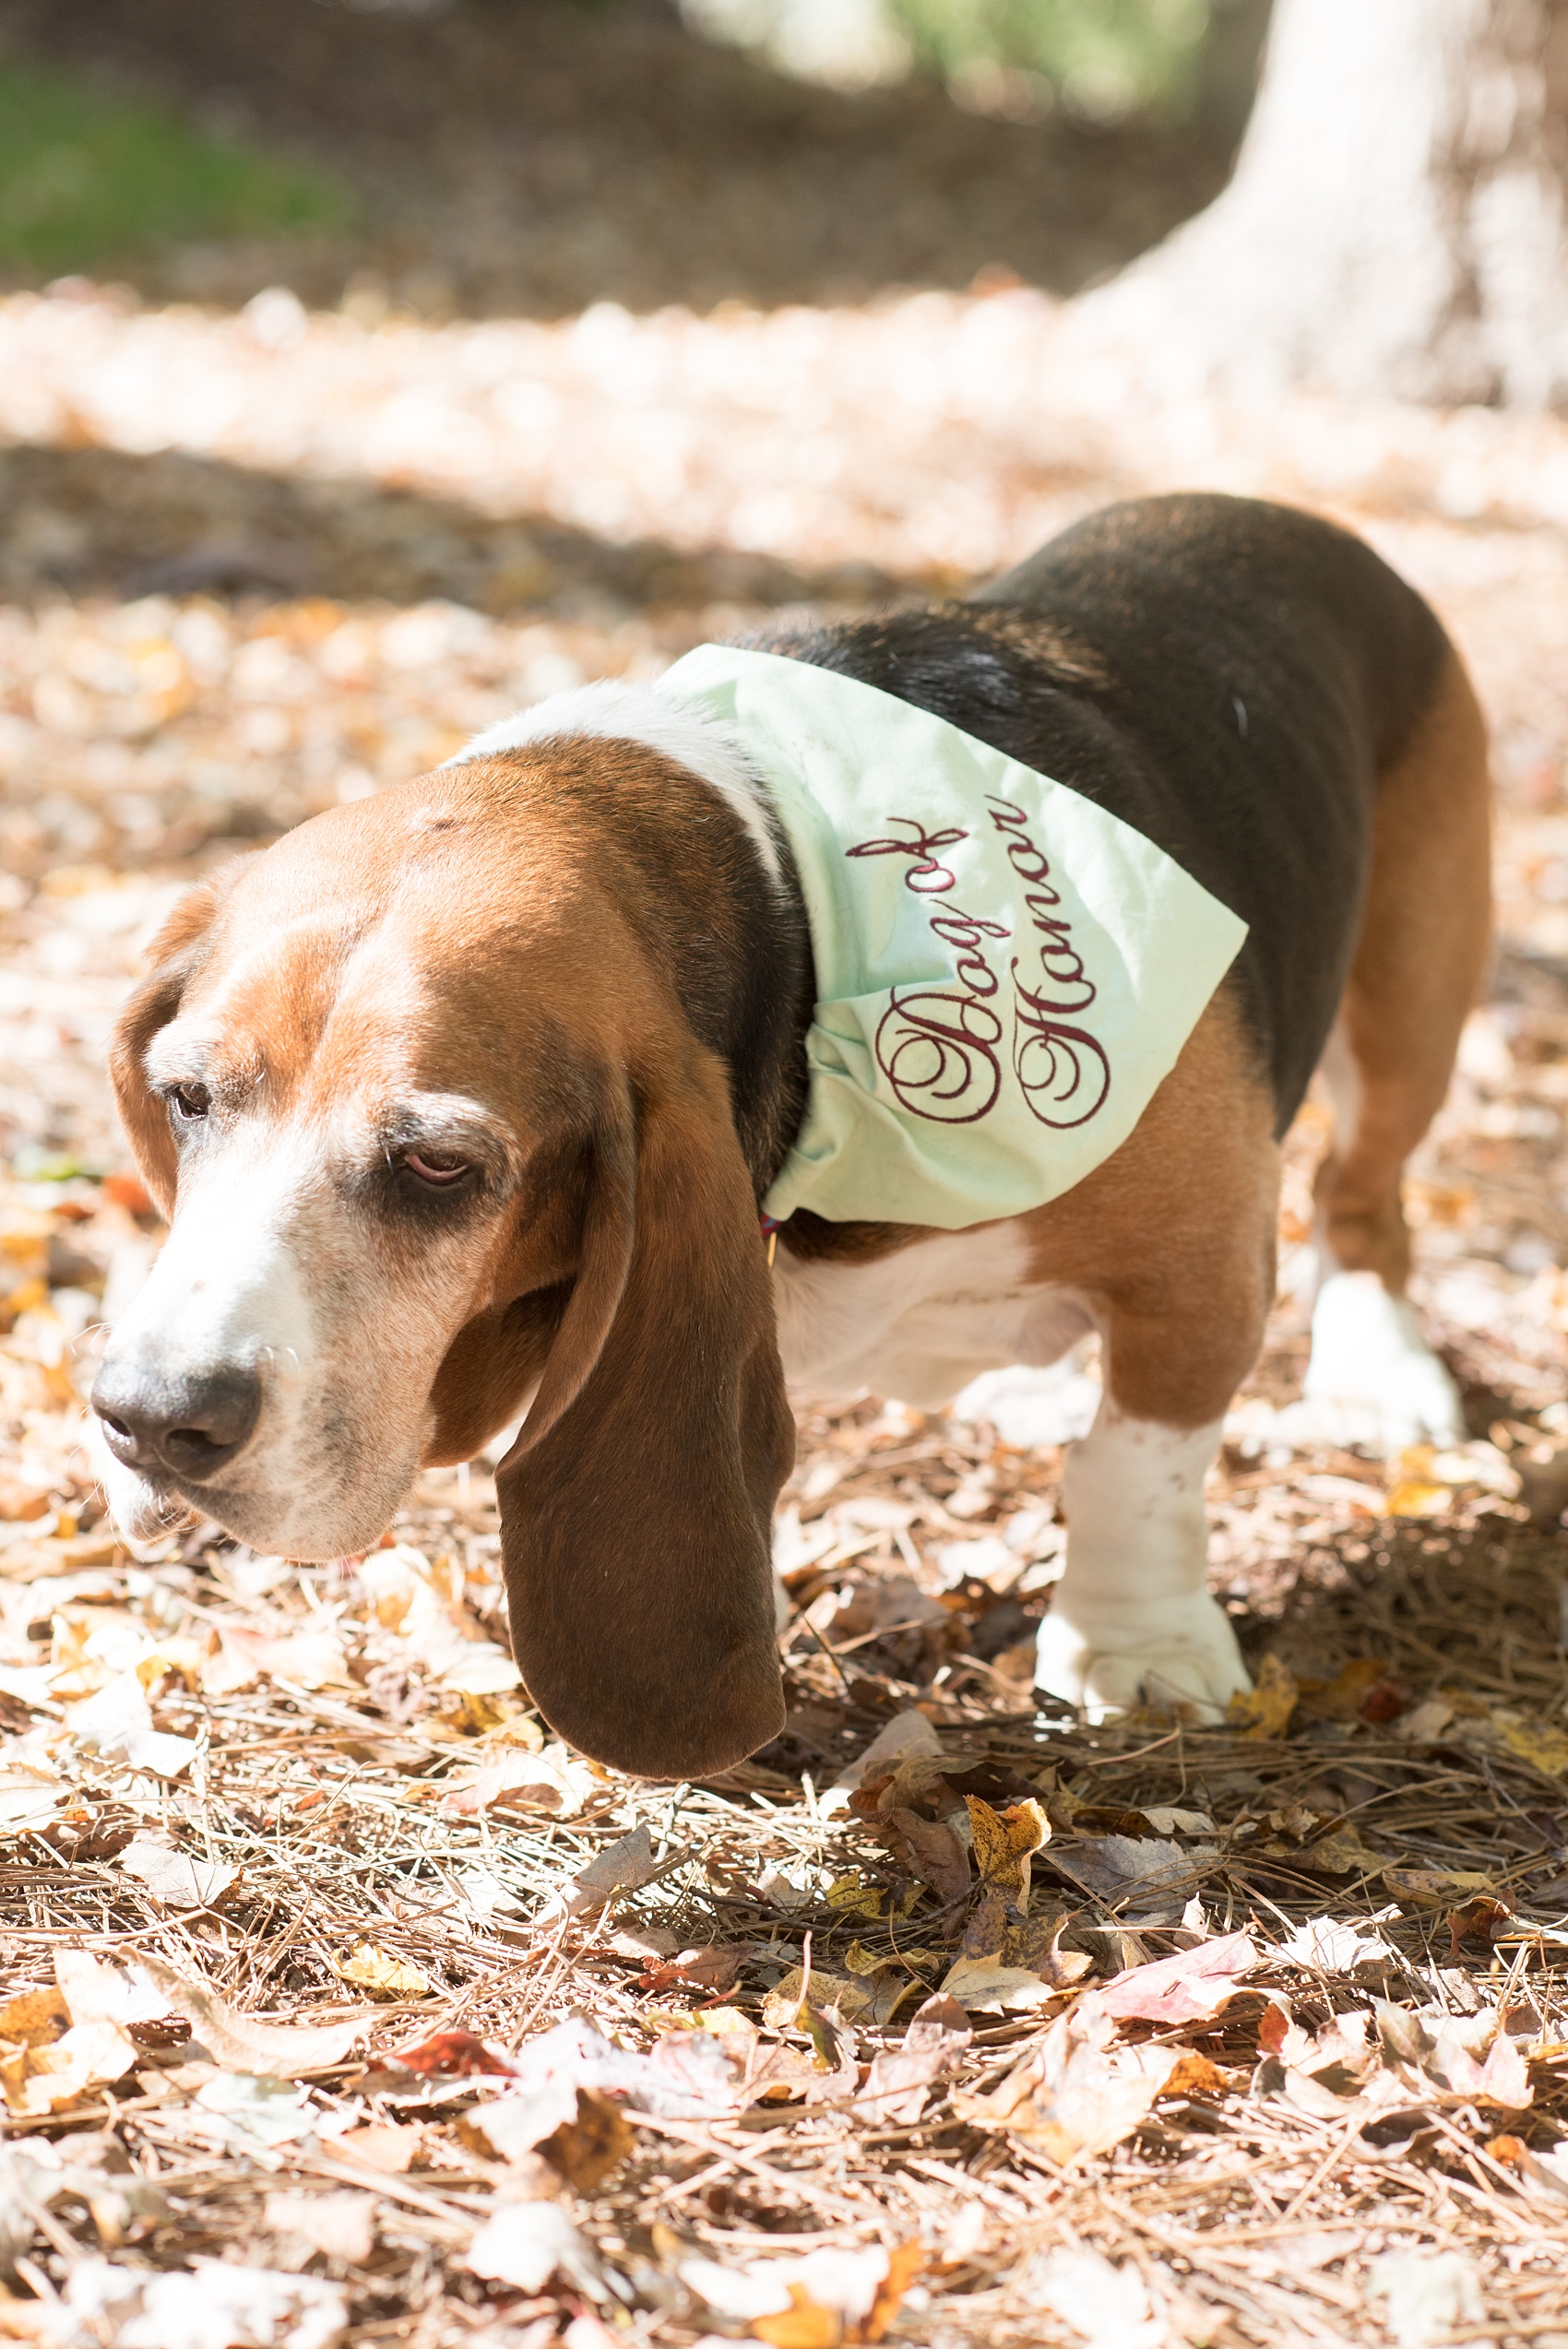 Mikkel Paige Photography photo of a wedding at The Rickhouse, NC. A picture of the bride's family Basset Hound dog with a "Dog of Honor" bandana.